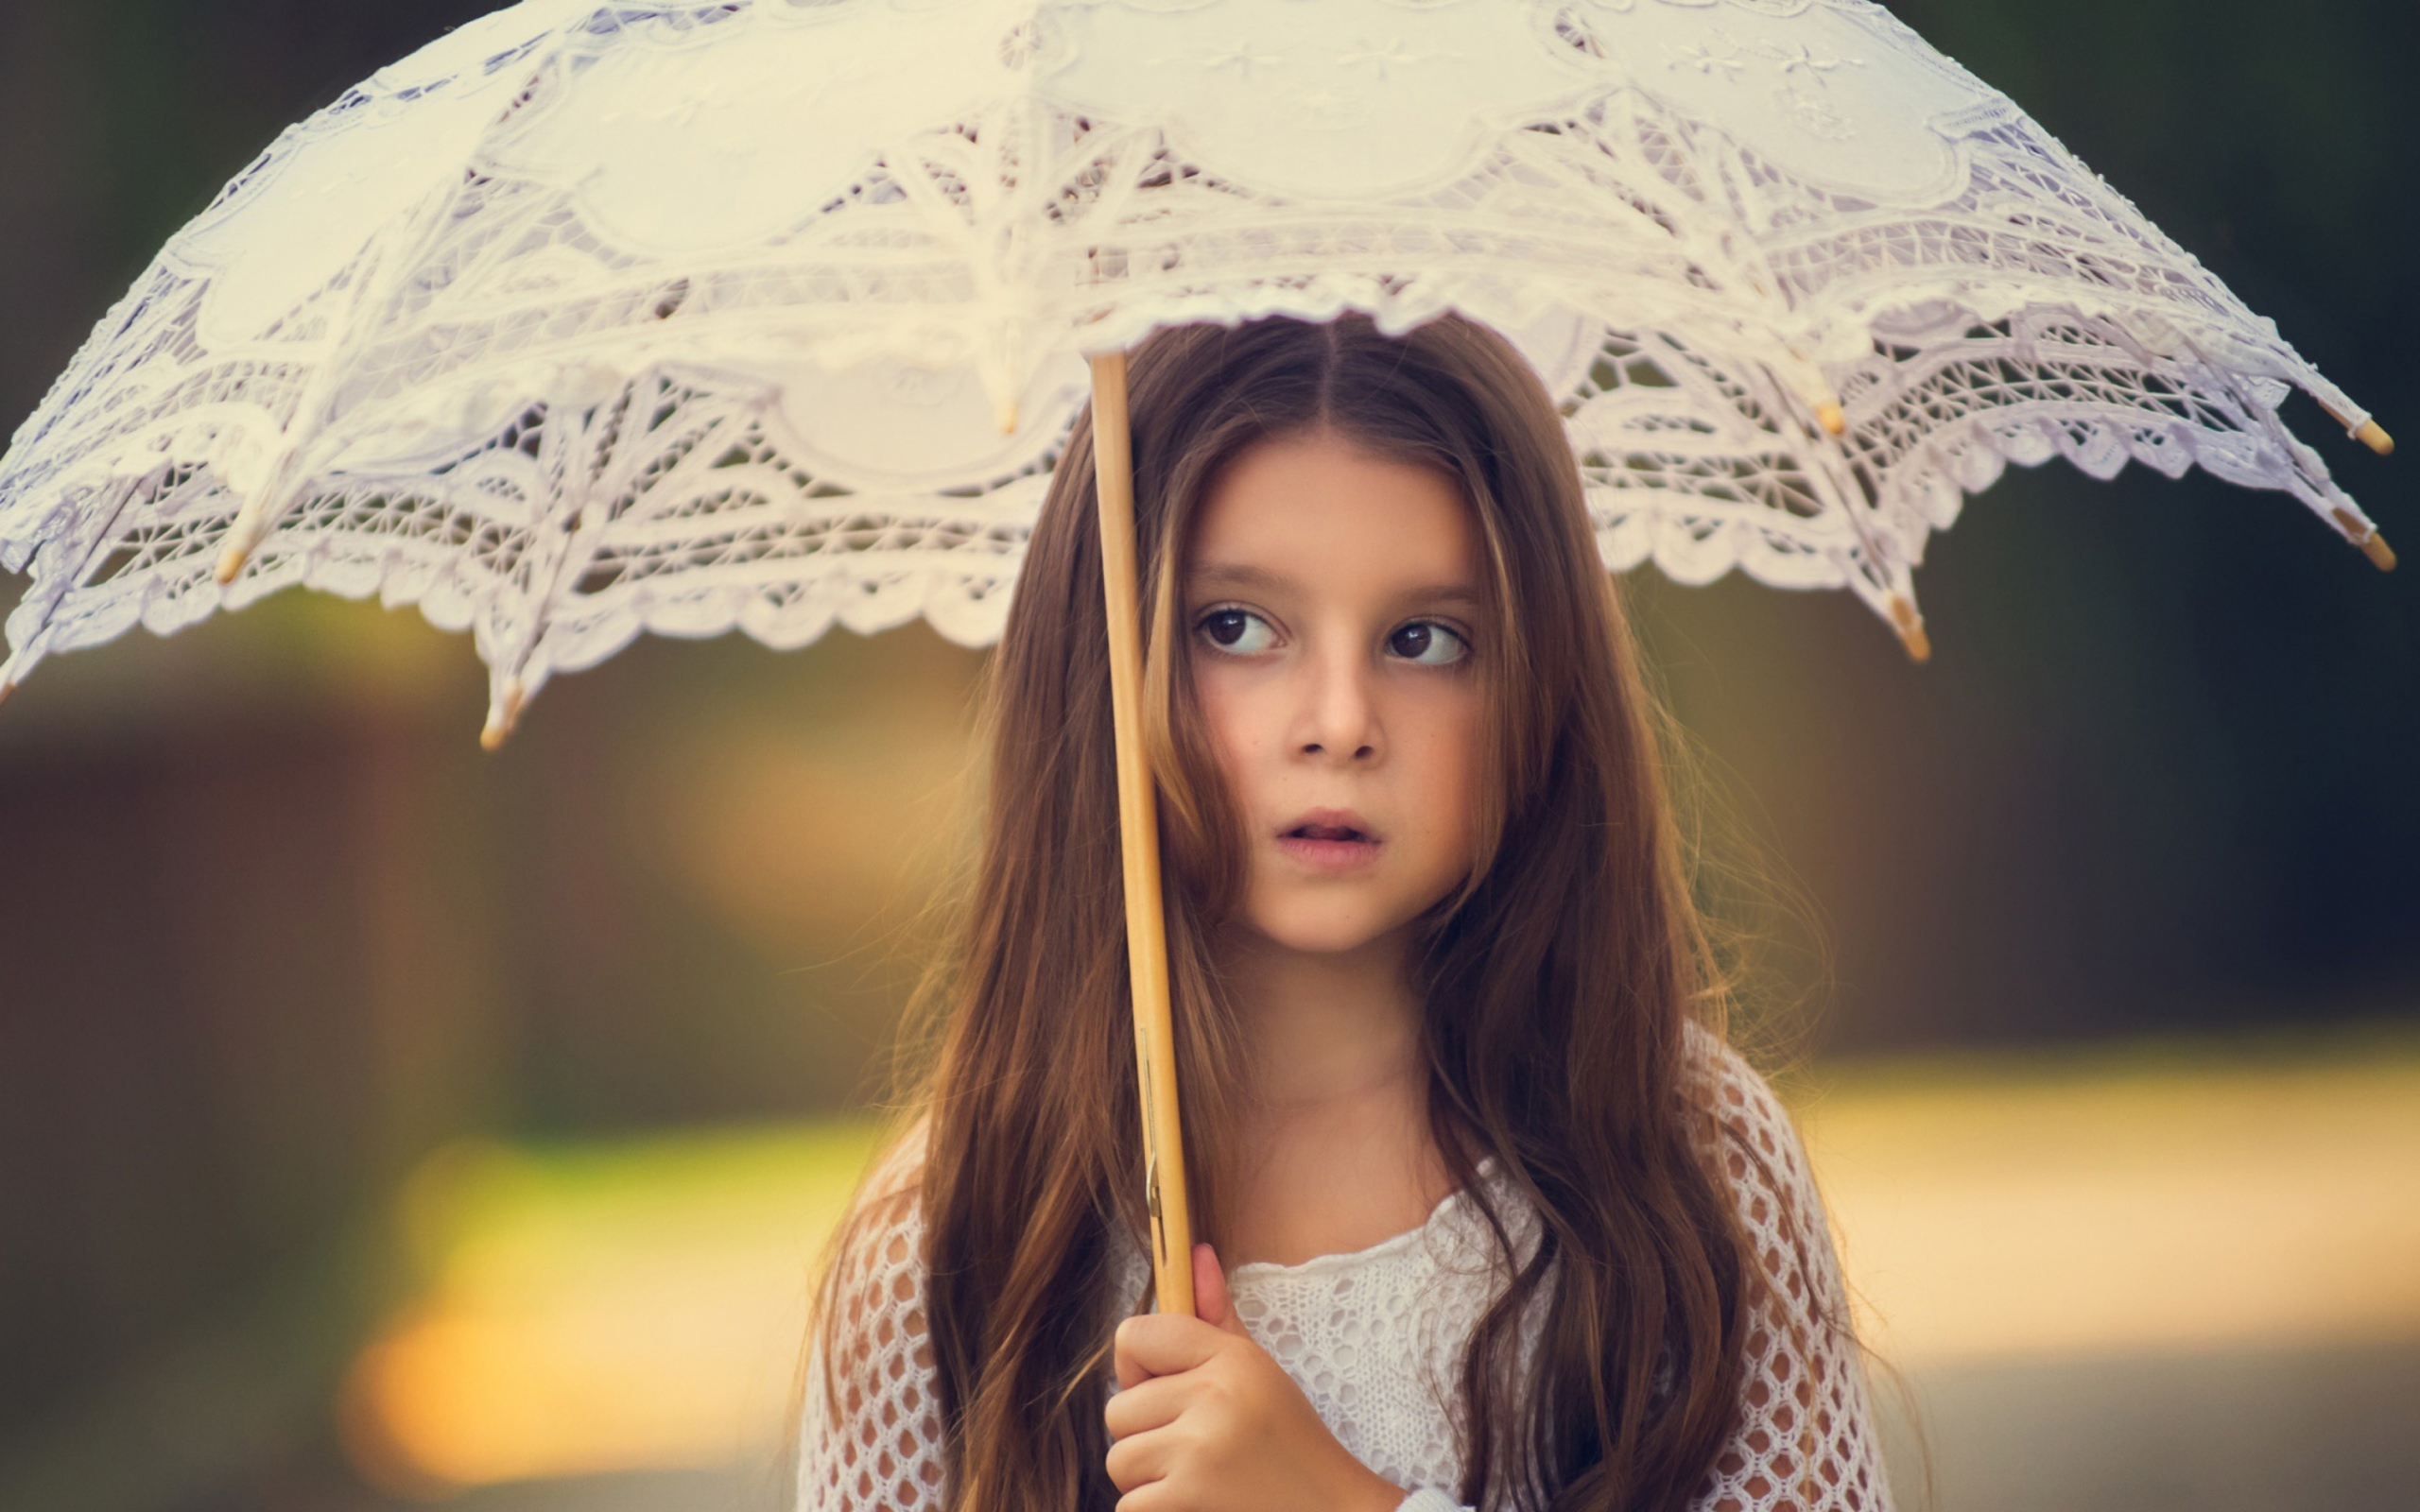 Girl With Lace Umbrella wallpaper 2560x1600